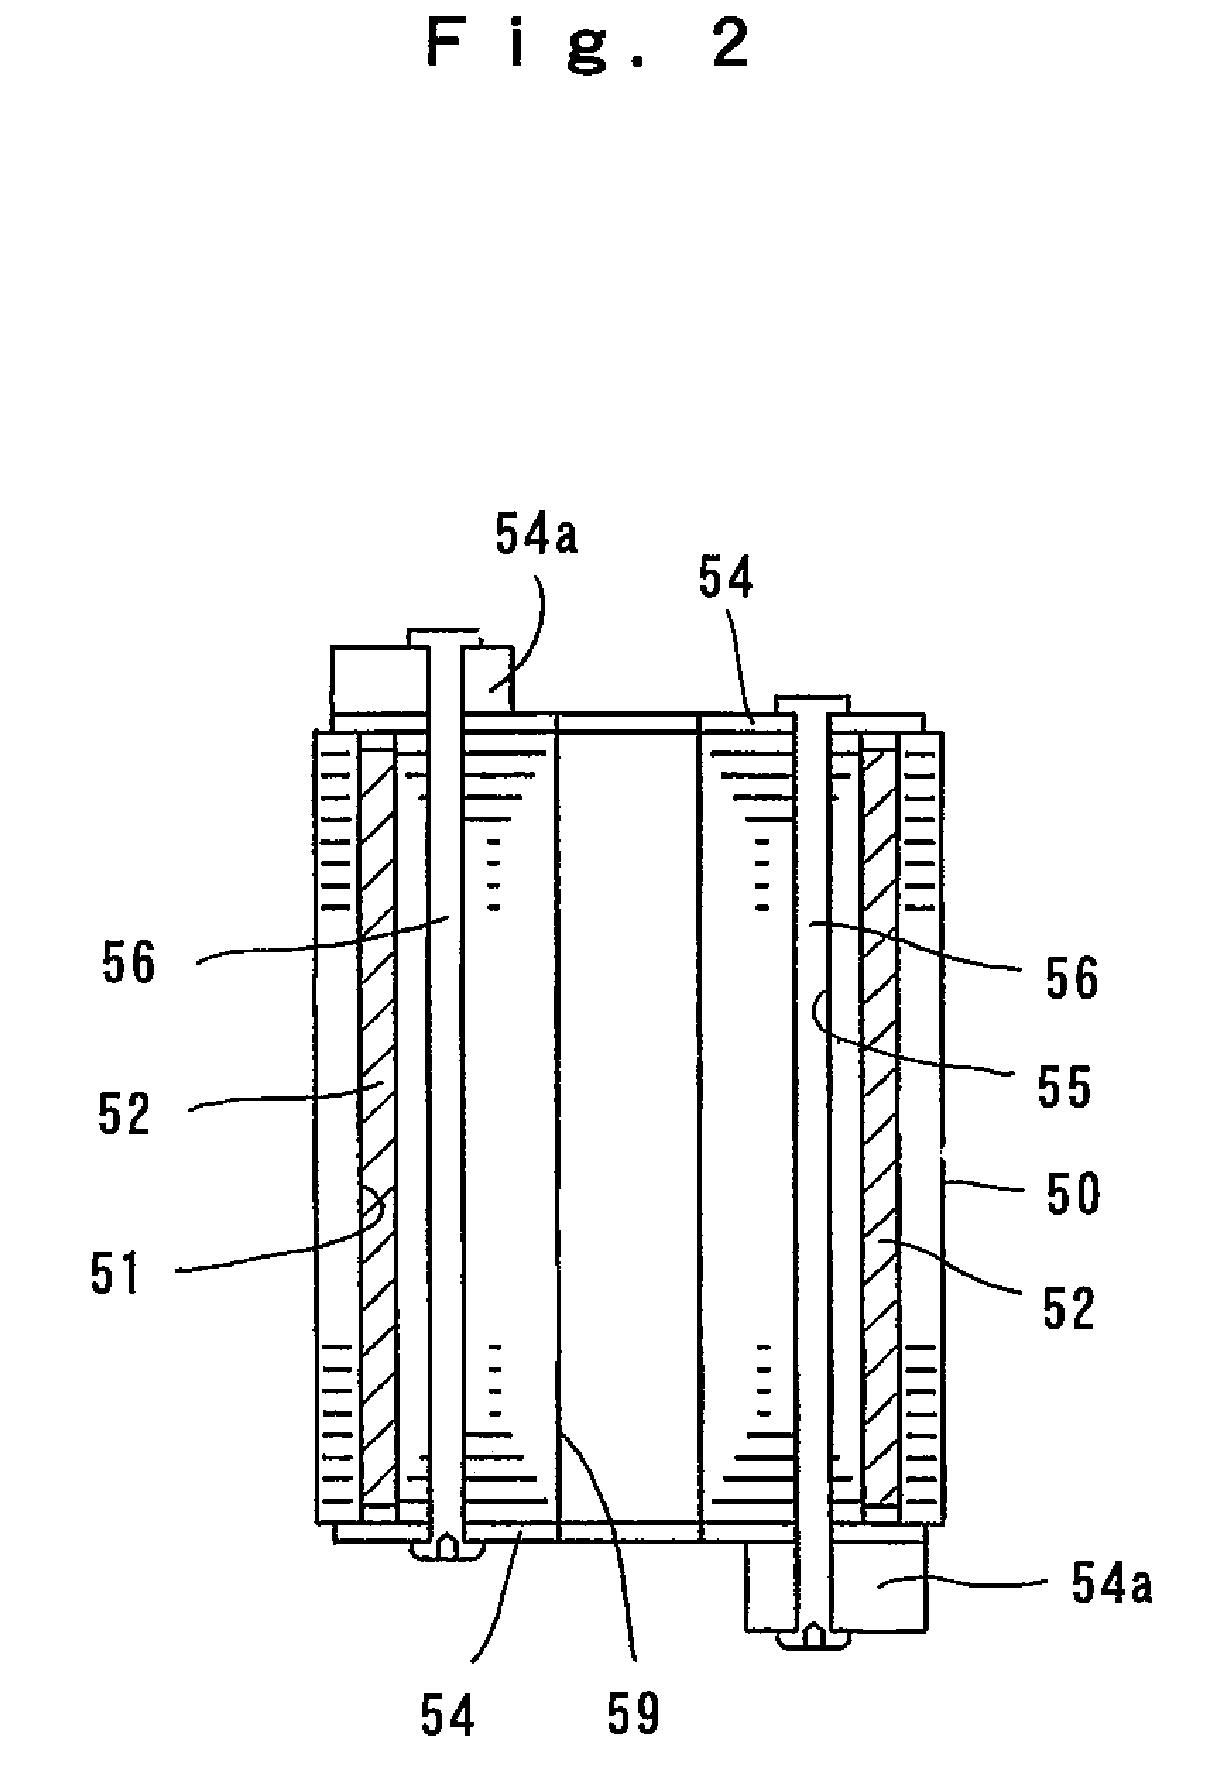 Interior permanent magnet electric motor including a rotor having circumferential surface portions with defined curve profiles